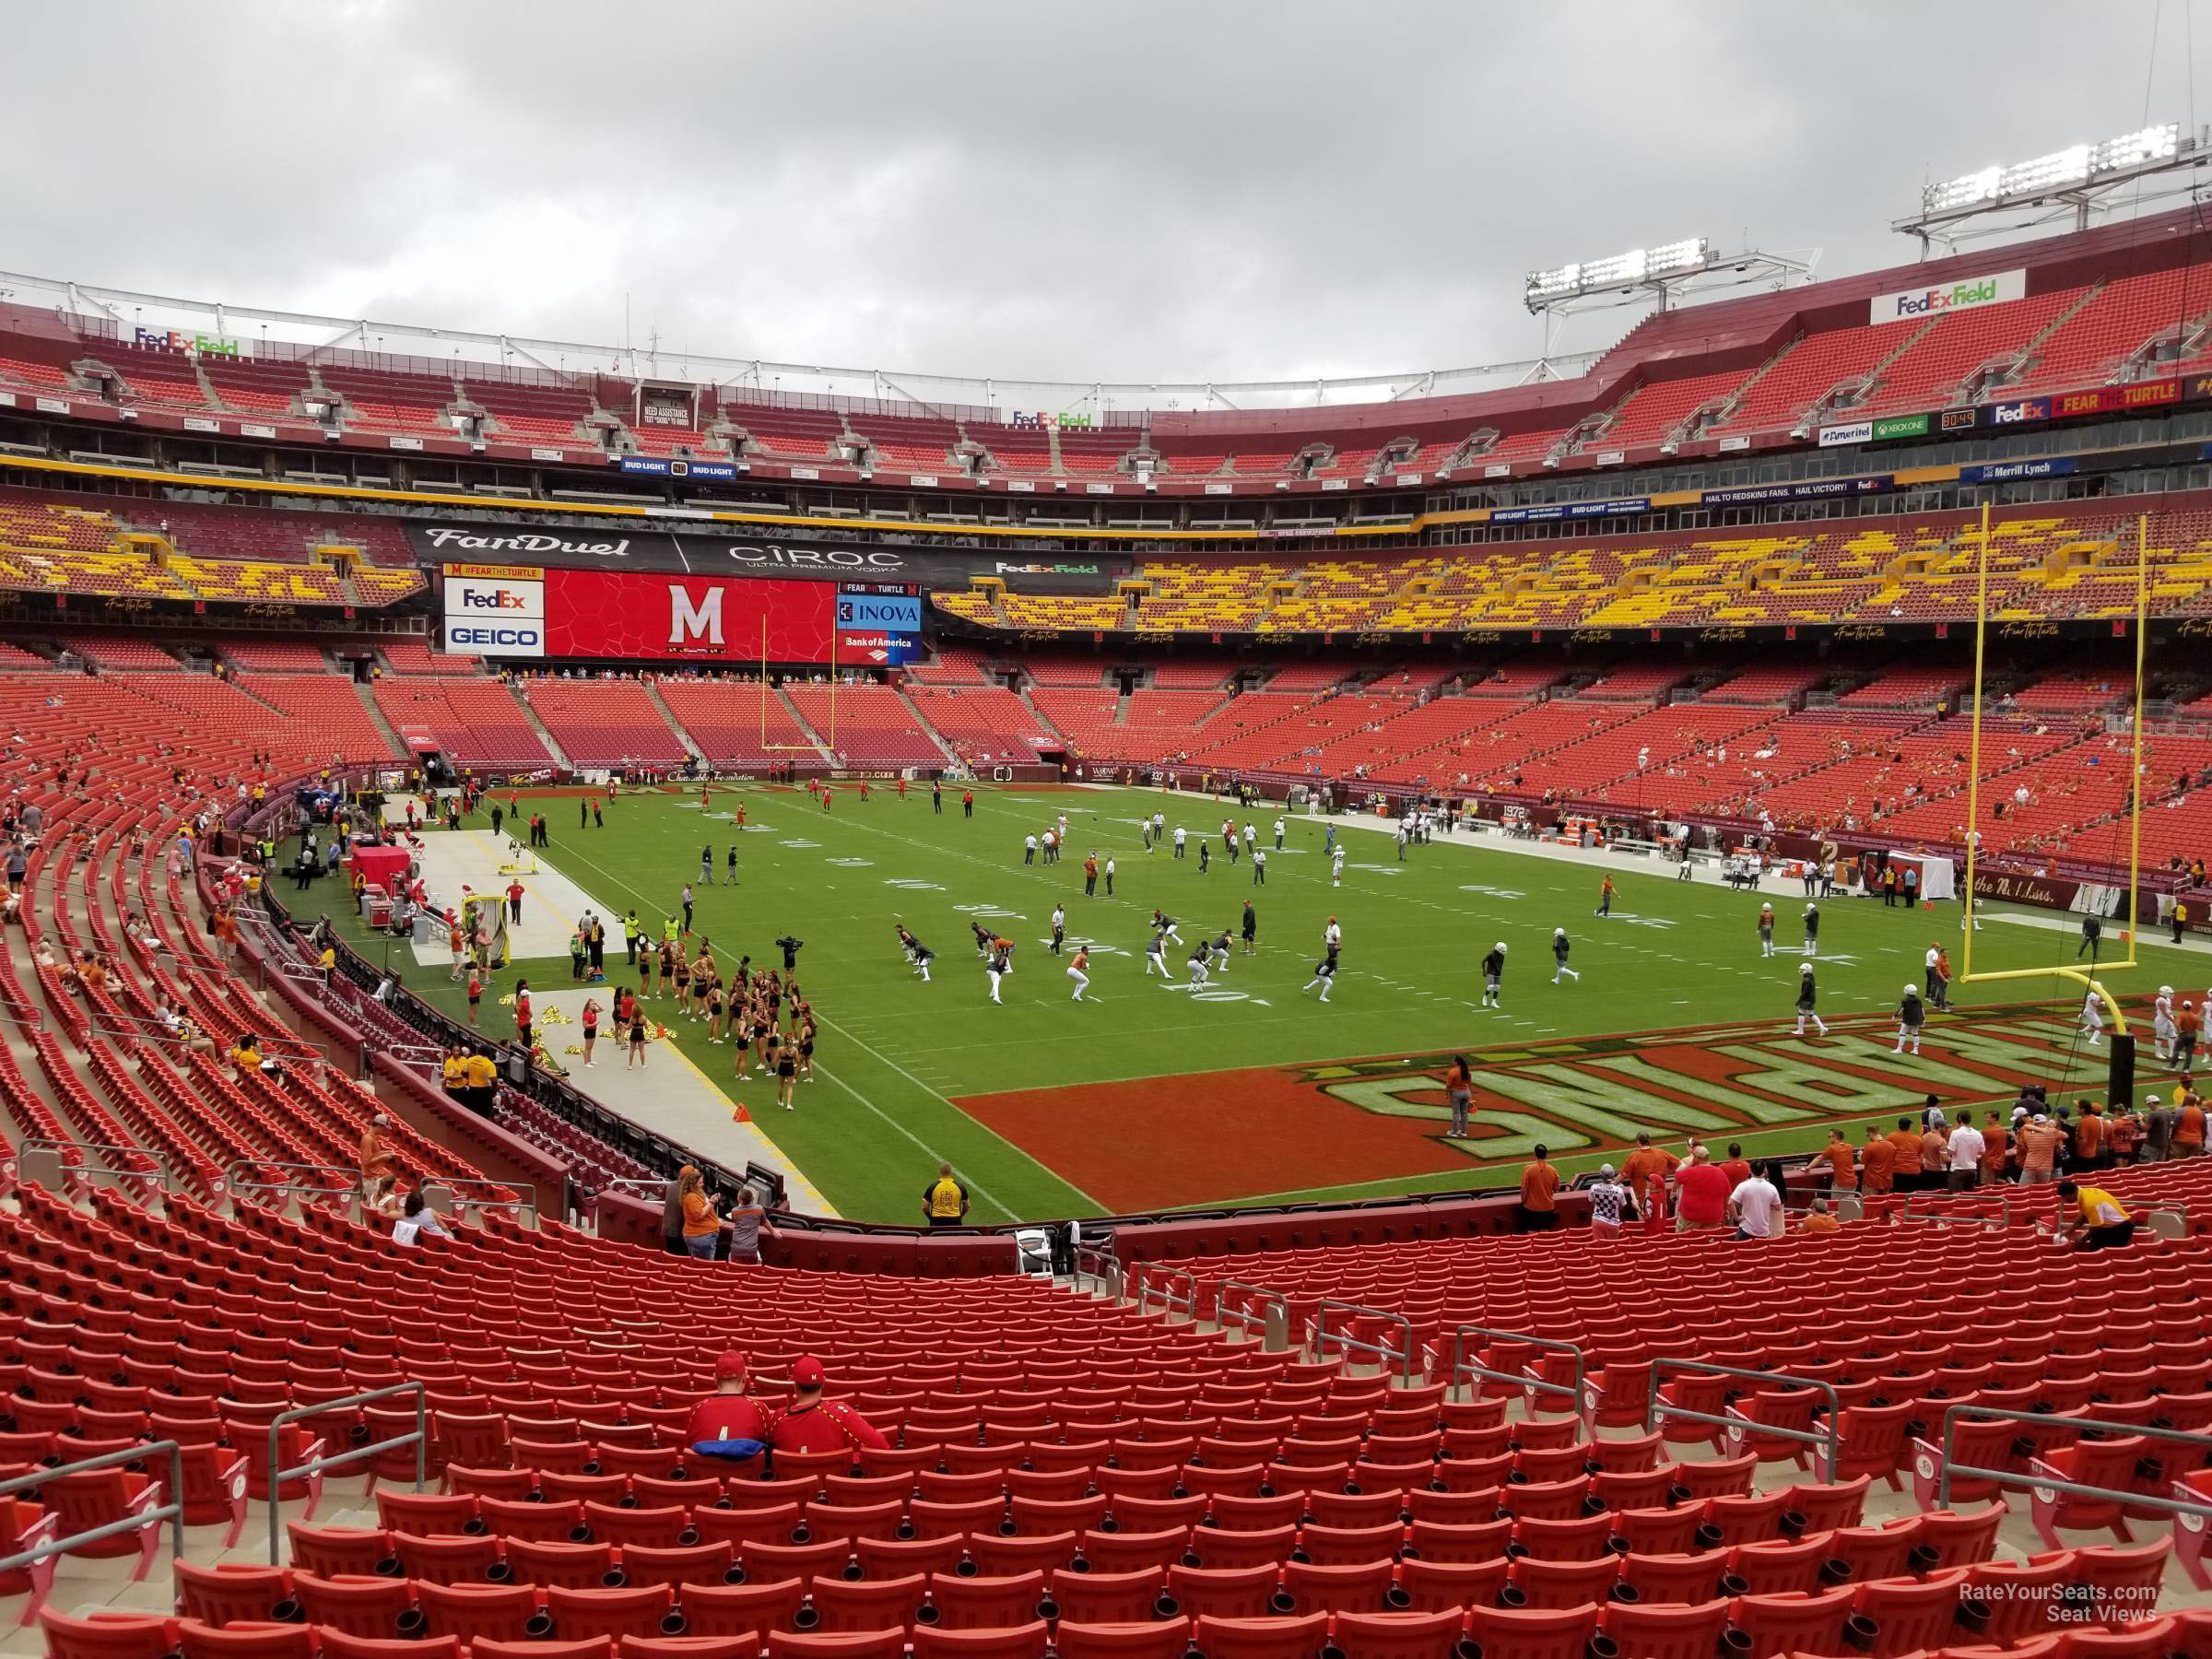 section 235, row 1 seat view  - fedexfield